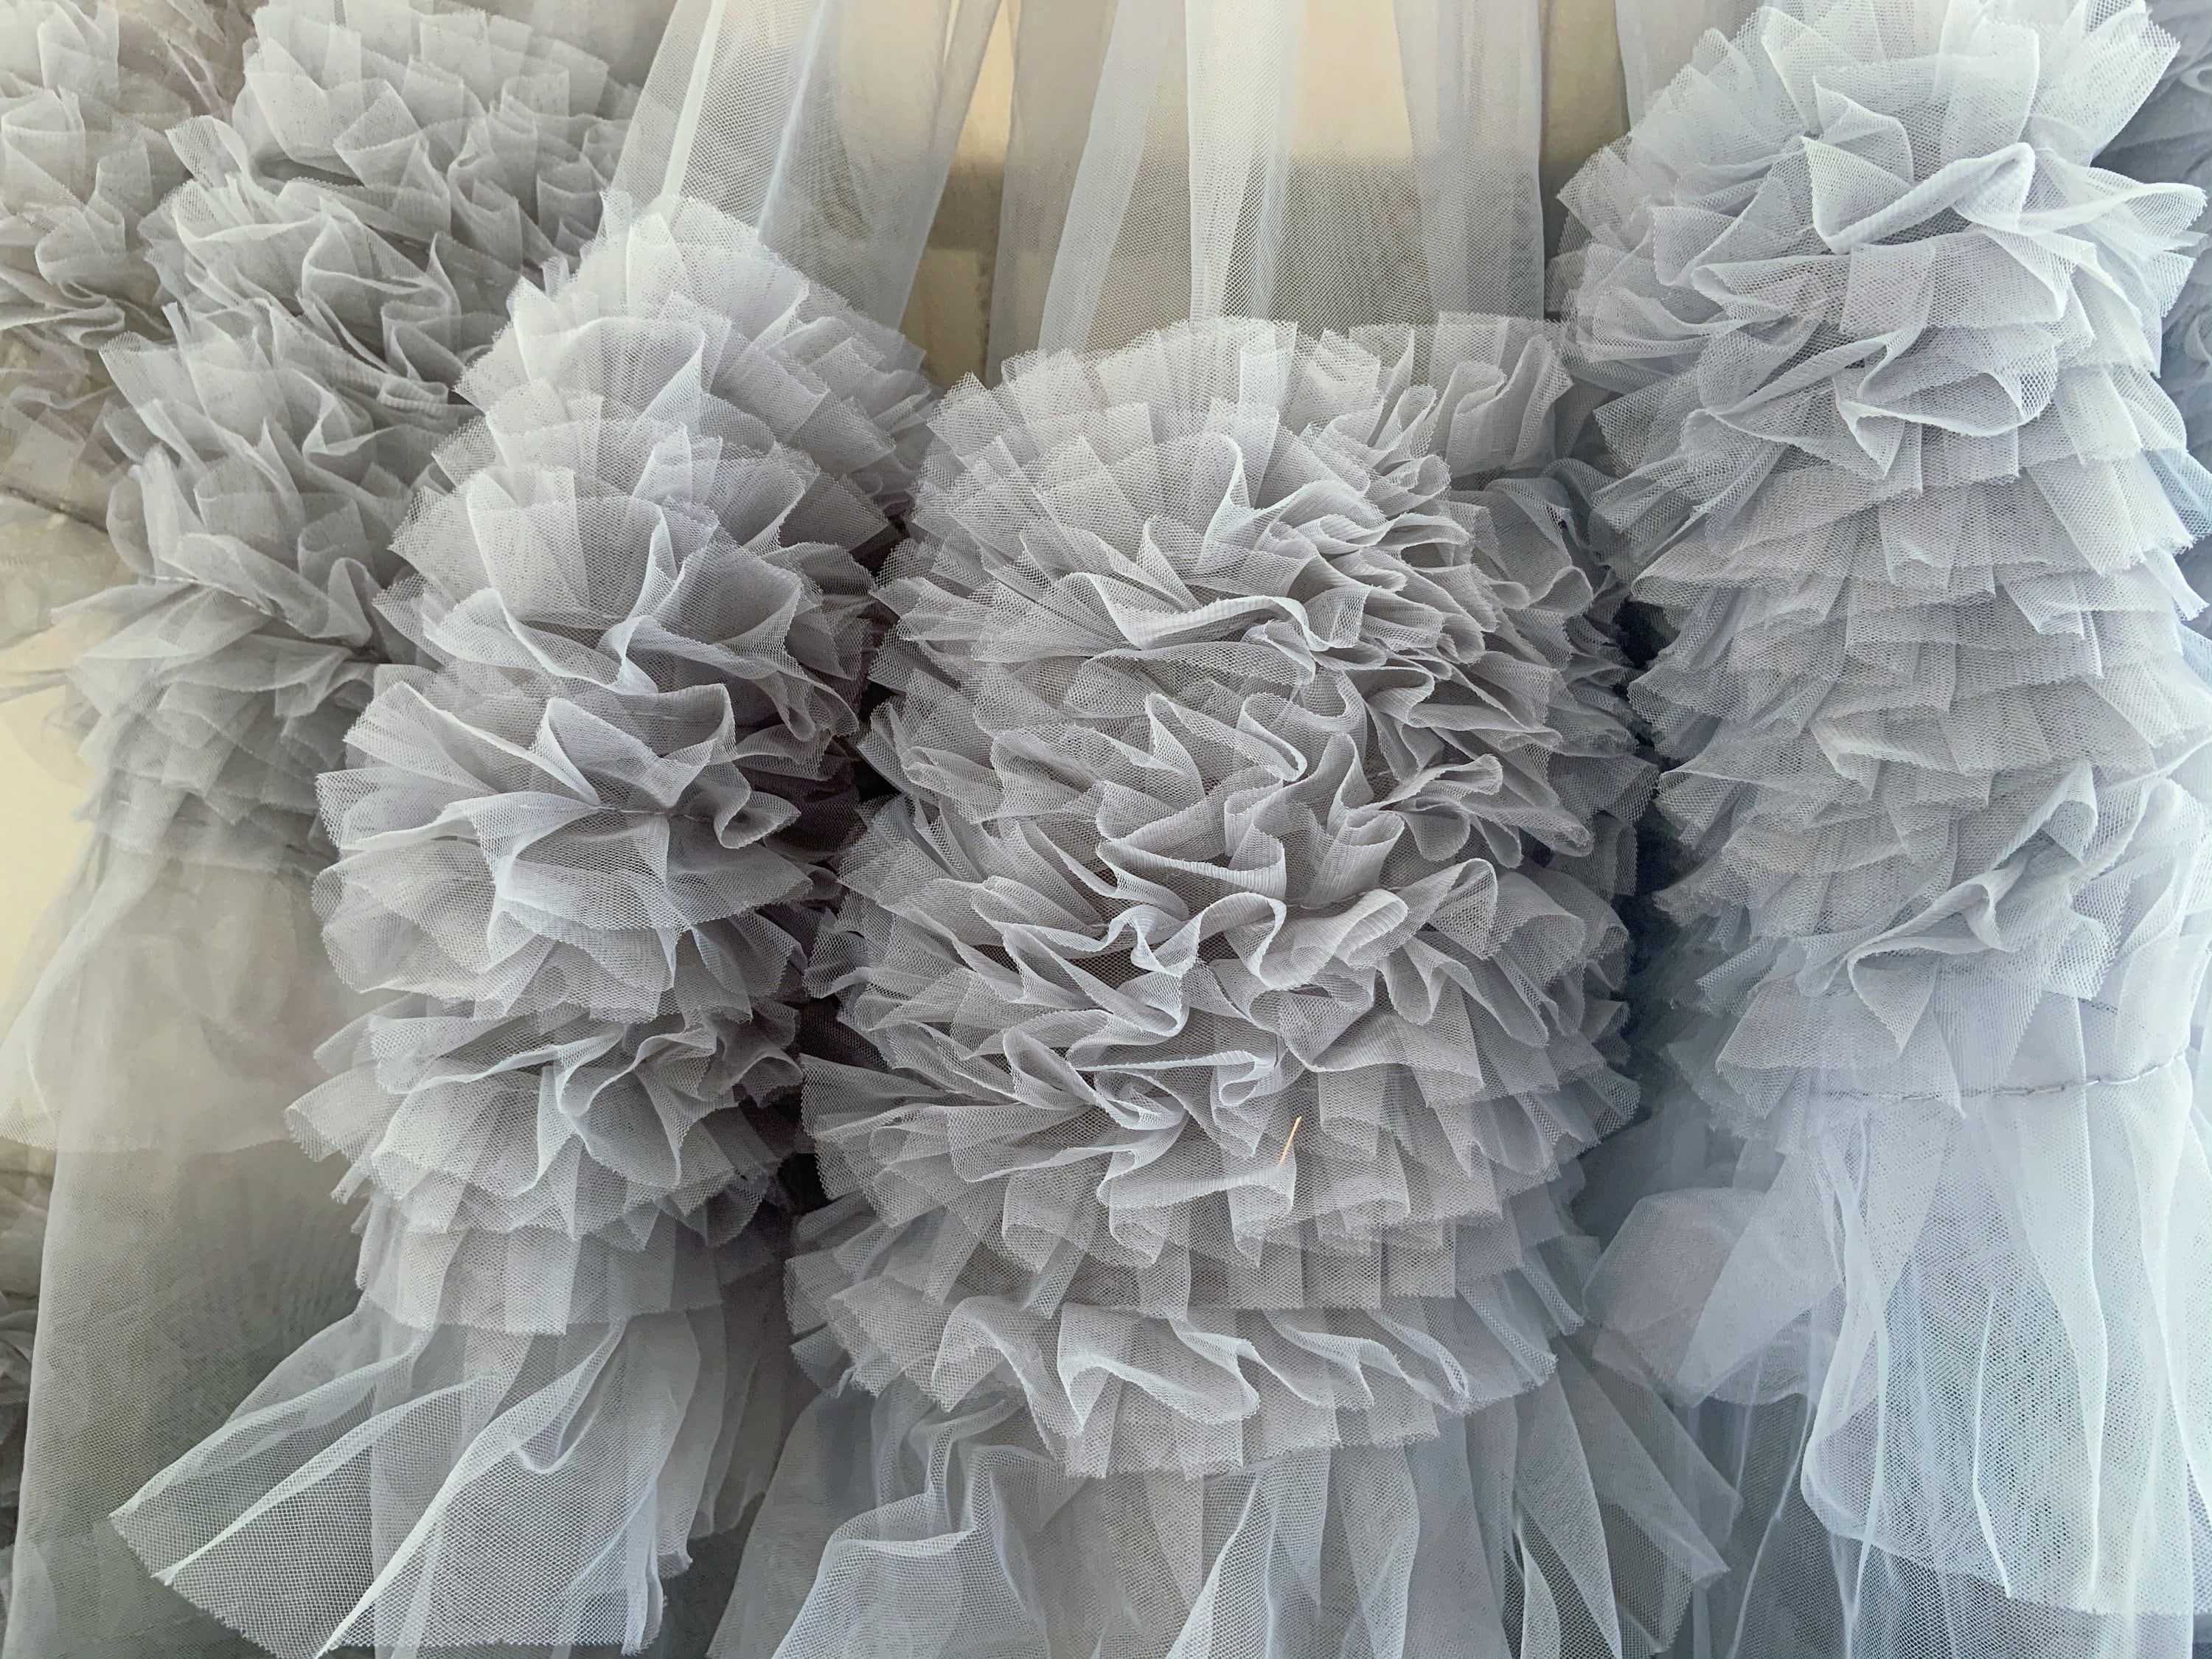 Tulle Pleated Ruffle Trim 10 cm Wide - Sold by the Yard - Humboldt